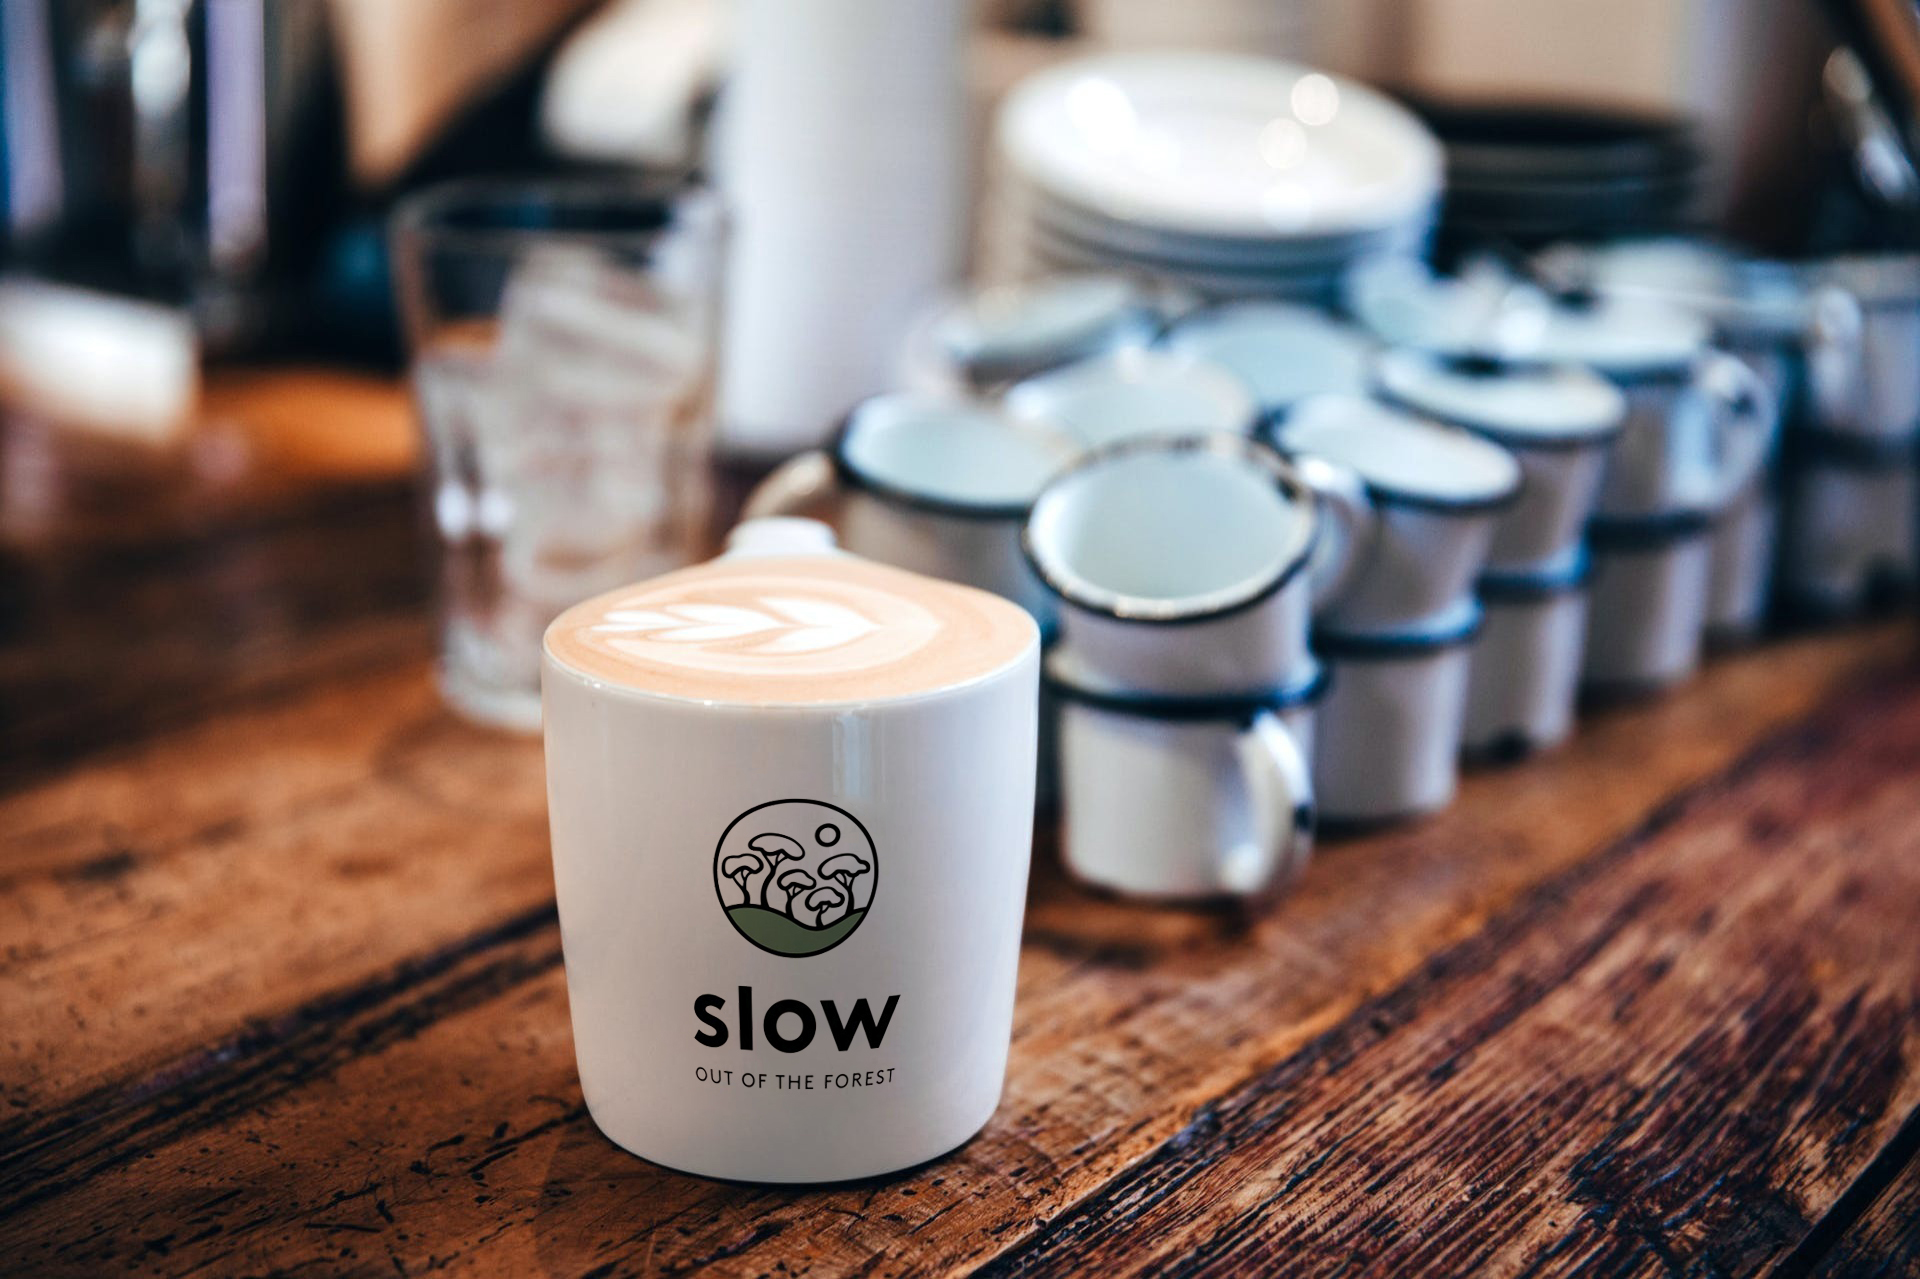 Slow Coffee Has Received the EU Organic Certification